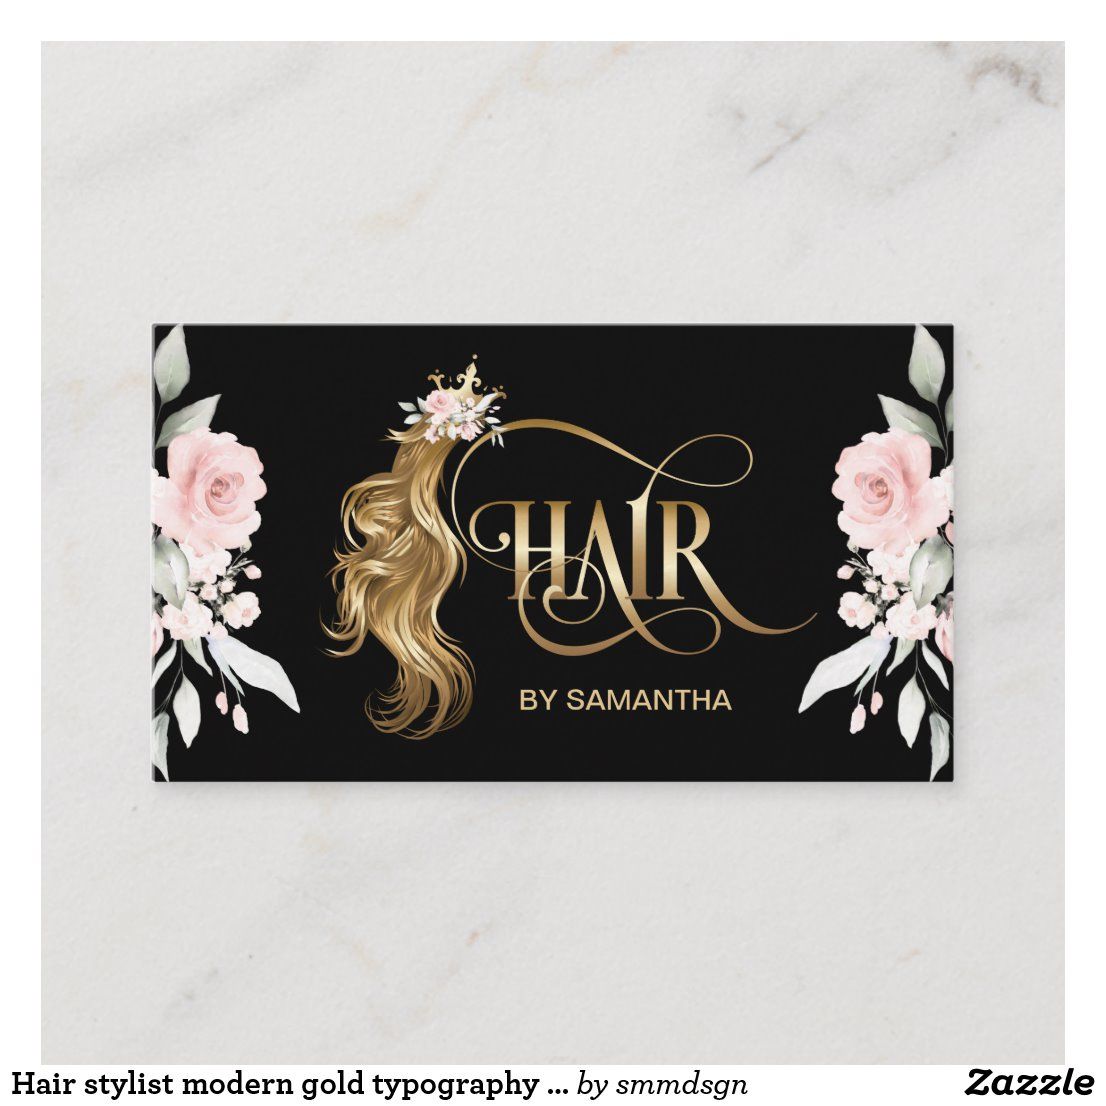 hair extension business cards 1